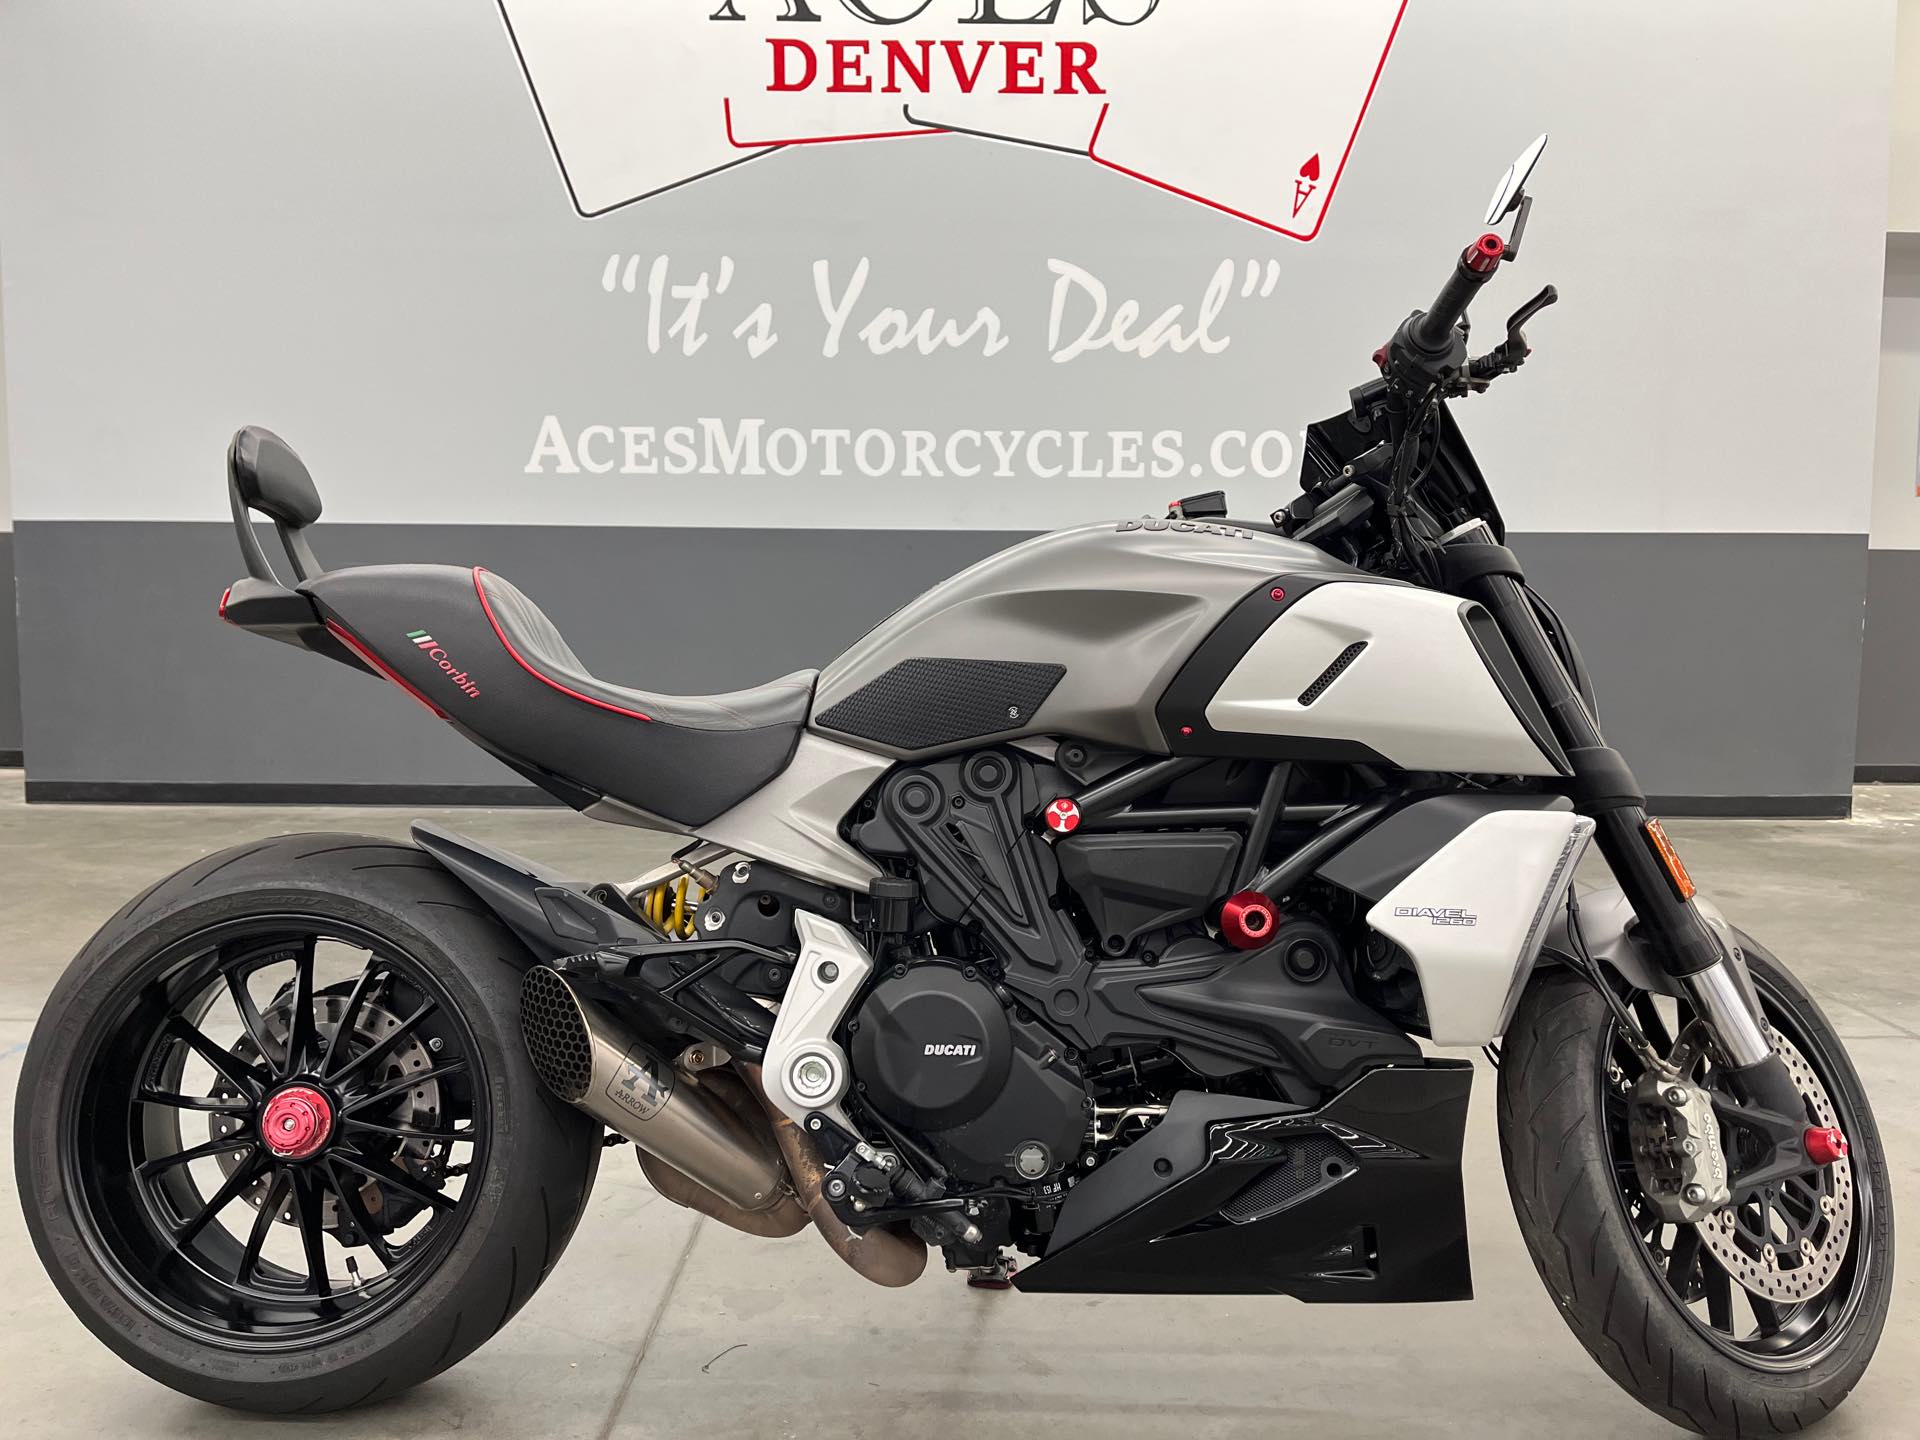 2020 Ducati Diavel 1260 at Aces Motorcycles - Denver